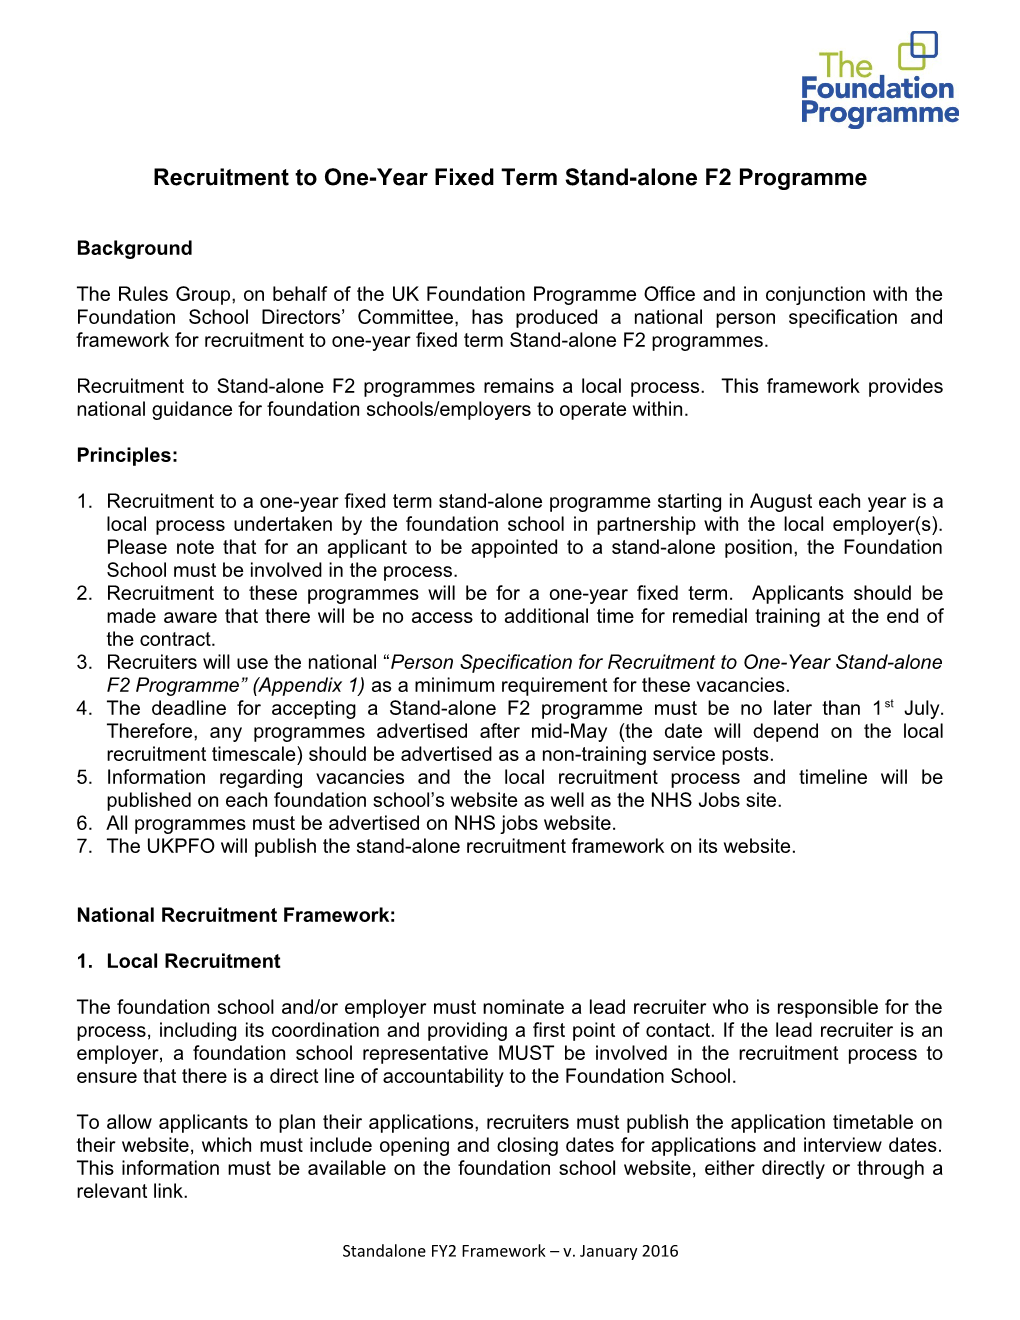 Recruitment to One-Year Fixed Term Stand-Alone F2 Programme